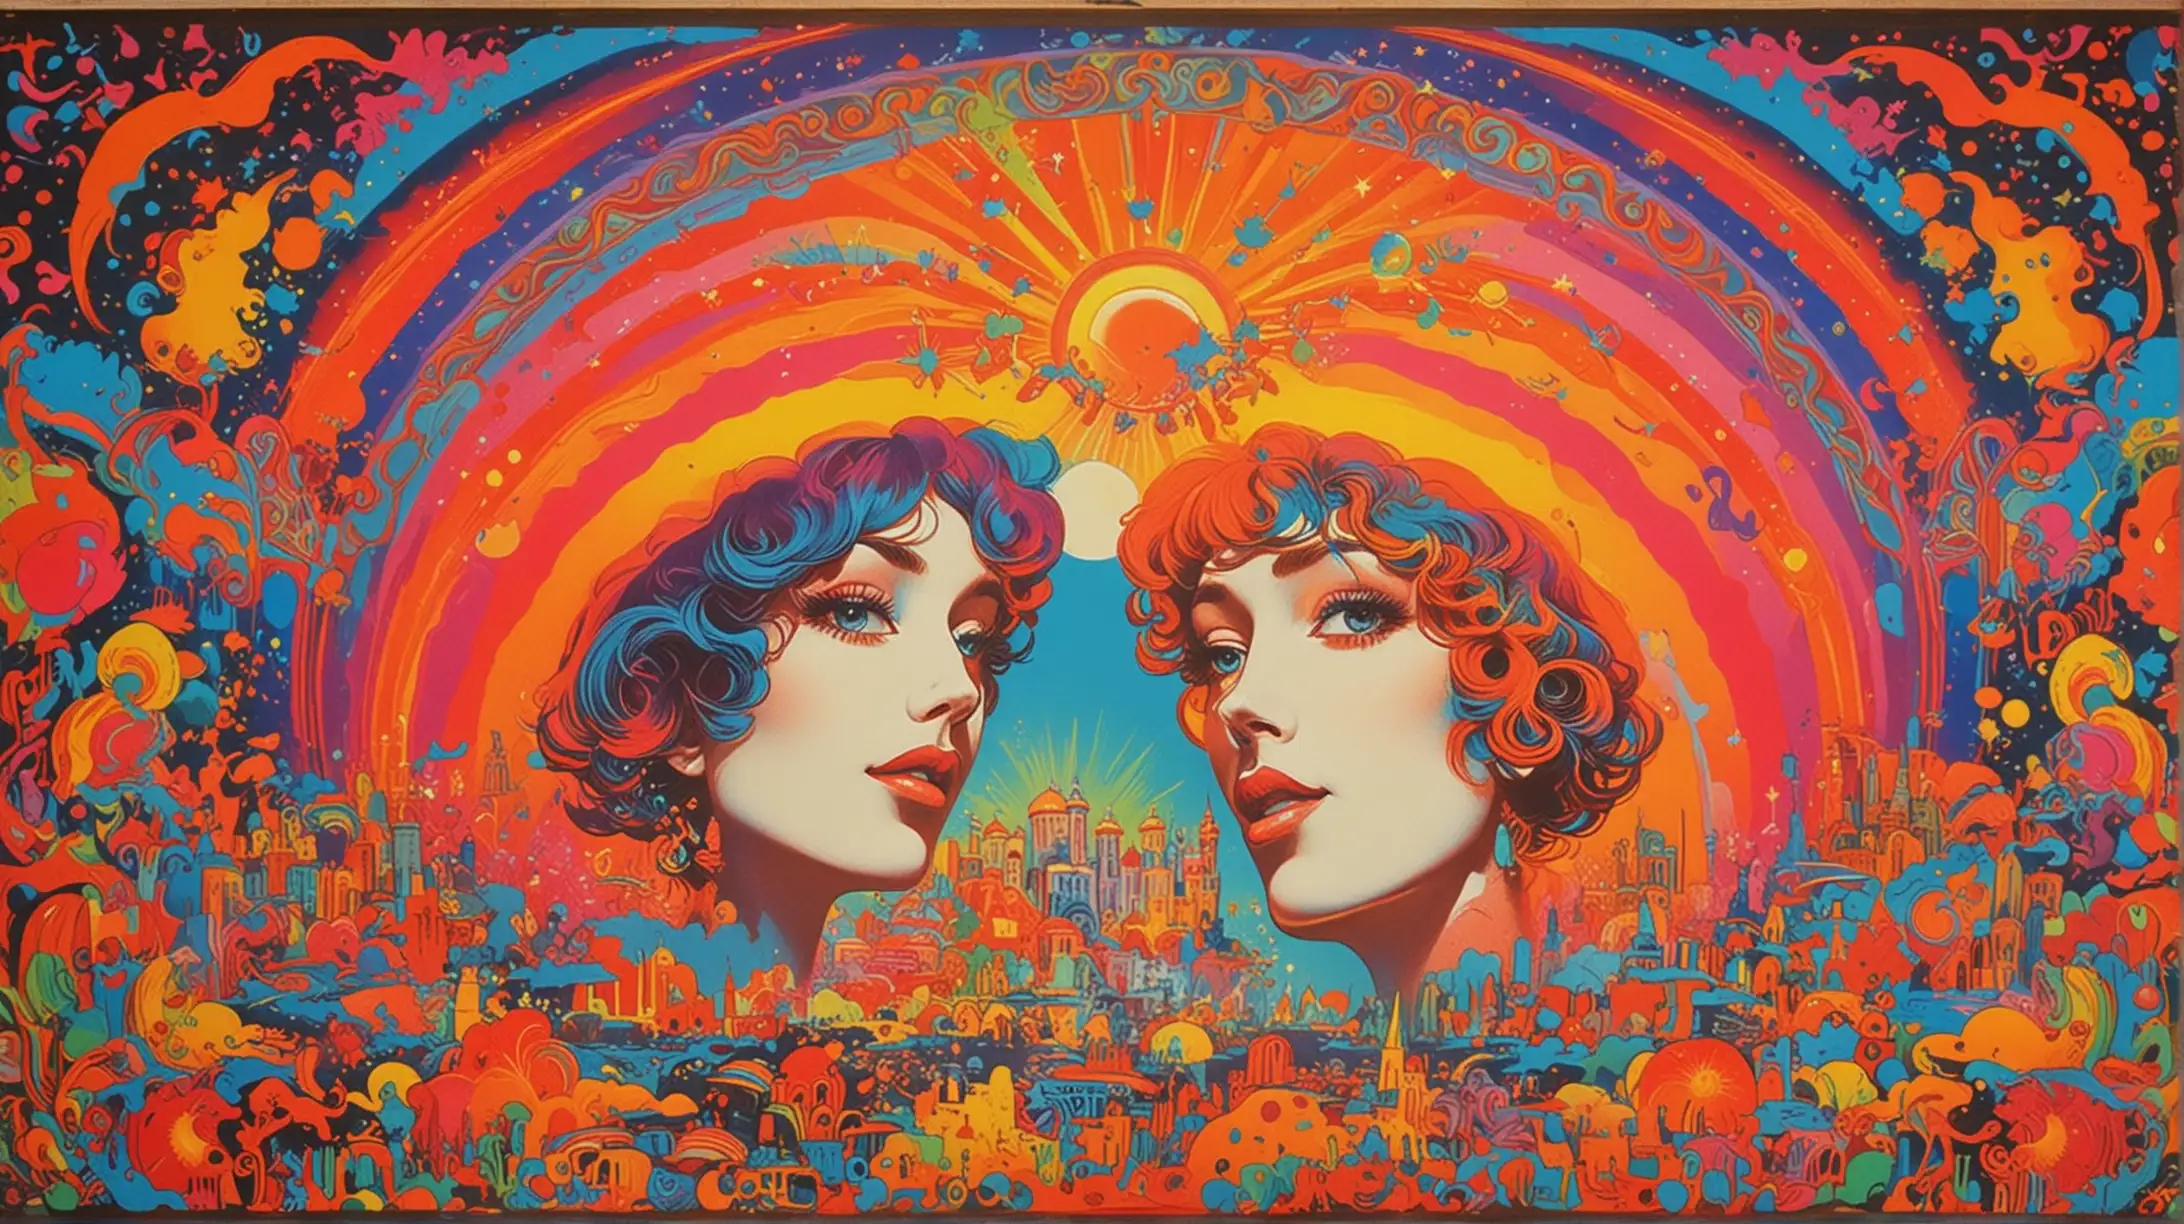 colorful 1960 psychedelic concert poster peter max style